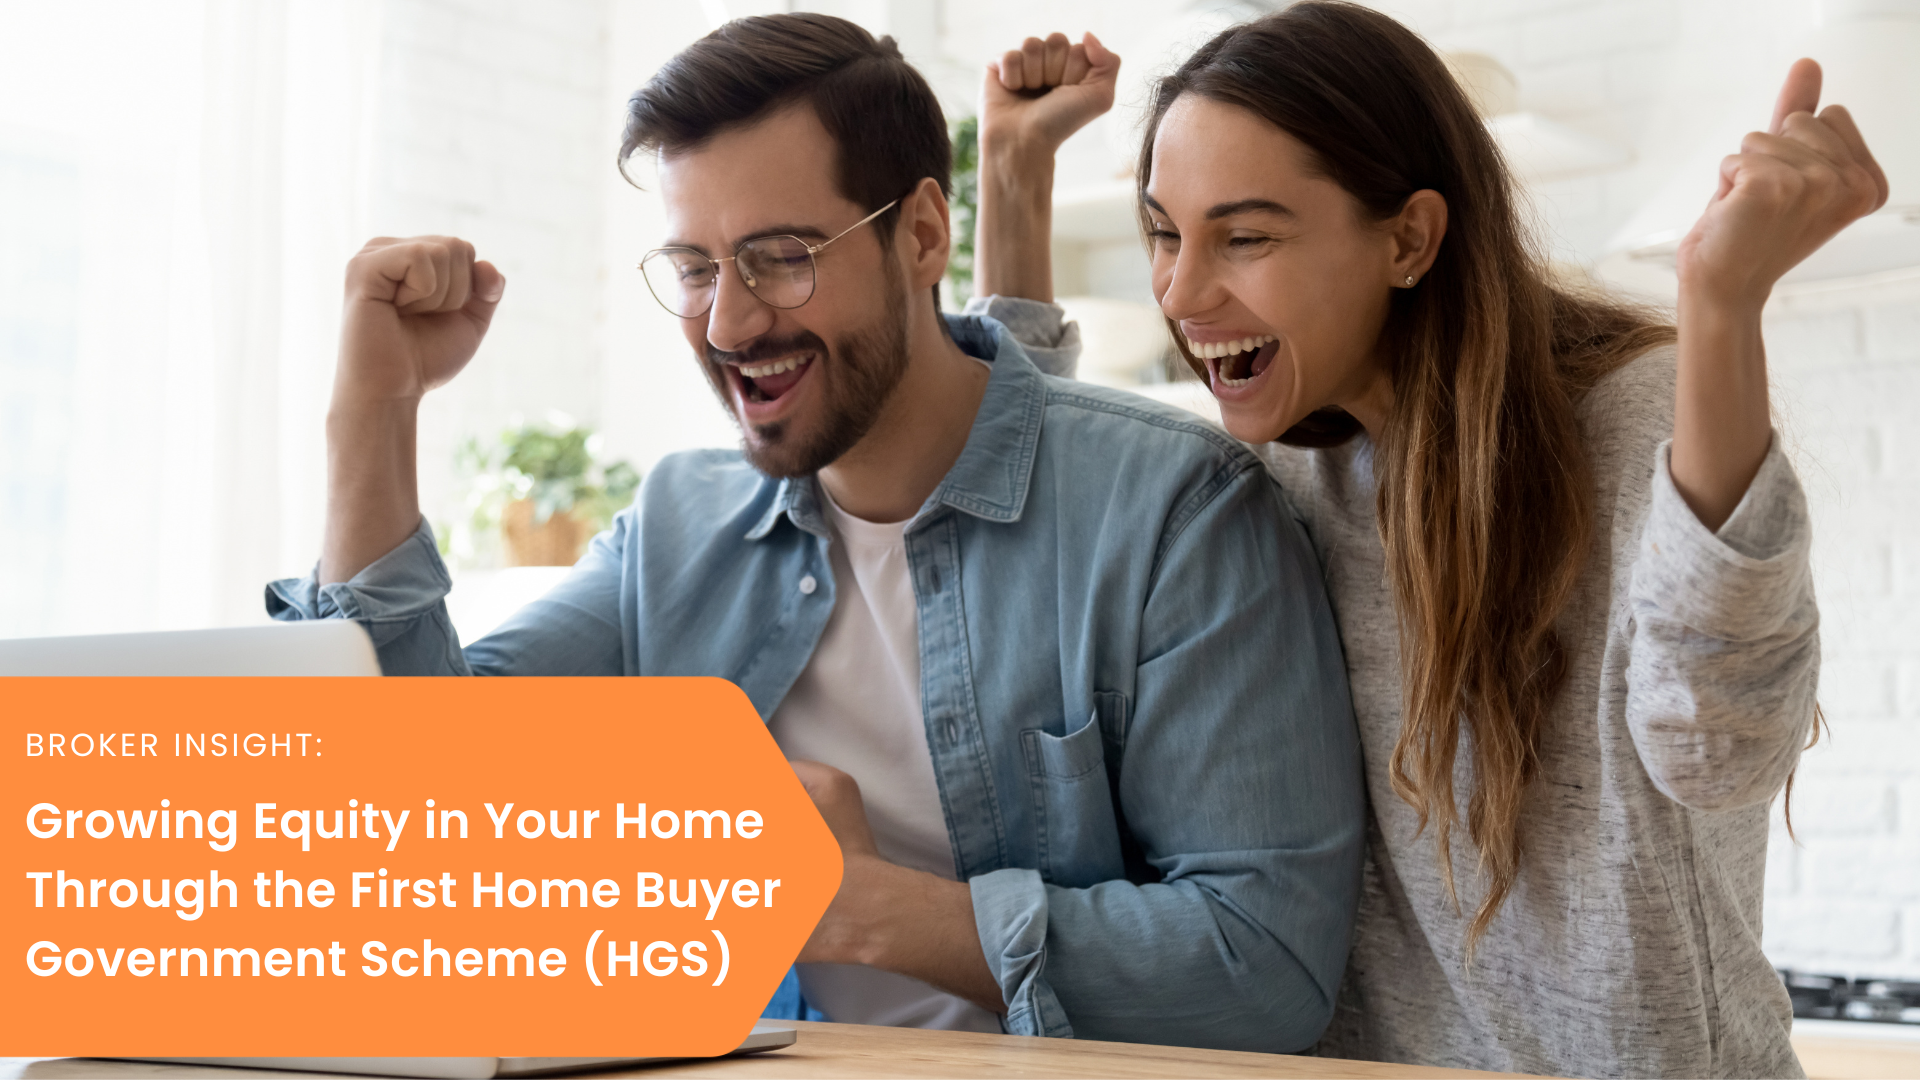 Growing Equity in Your Home Through the HGS | Lendstreet